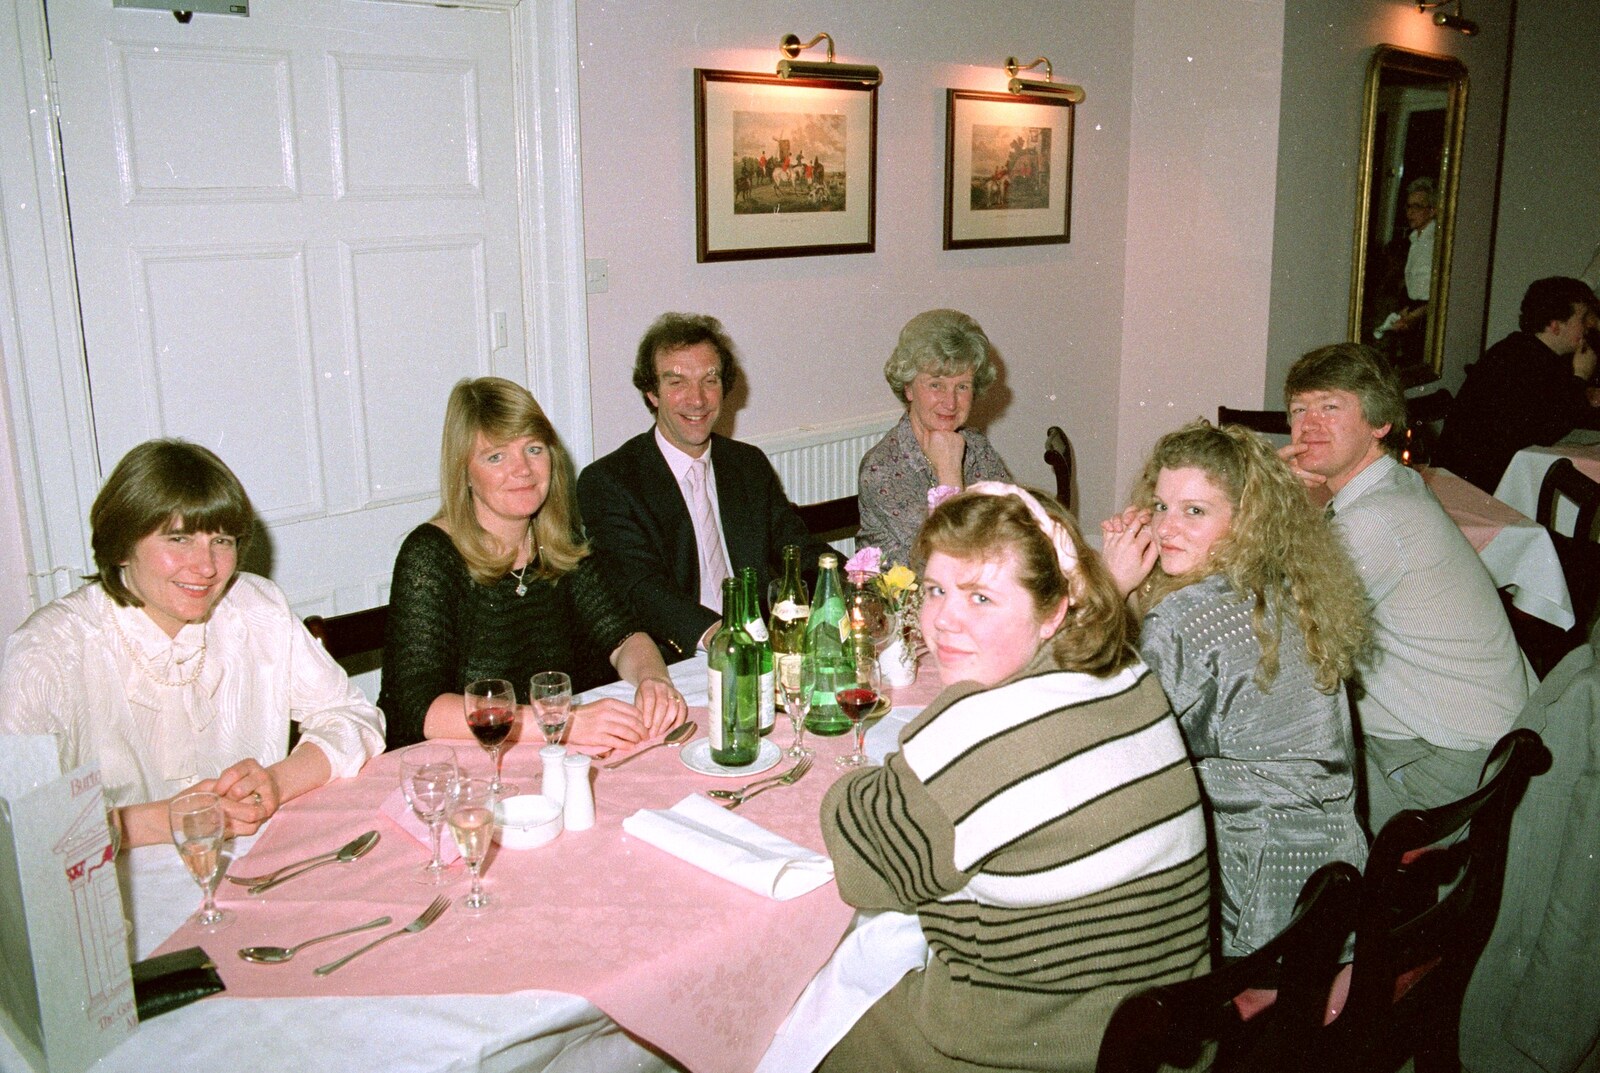 Another look around the table from Mother's 40th, Burton, Christchurch, Dorset - 18th April 1987